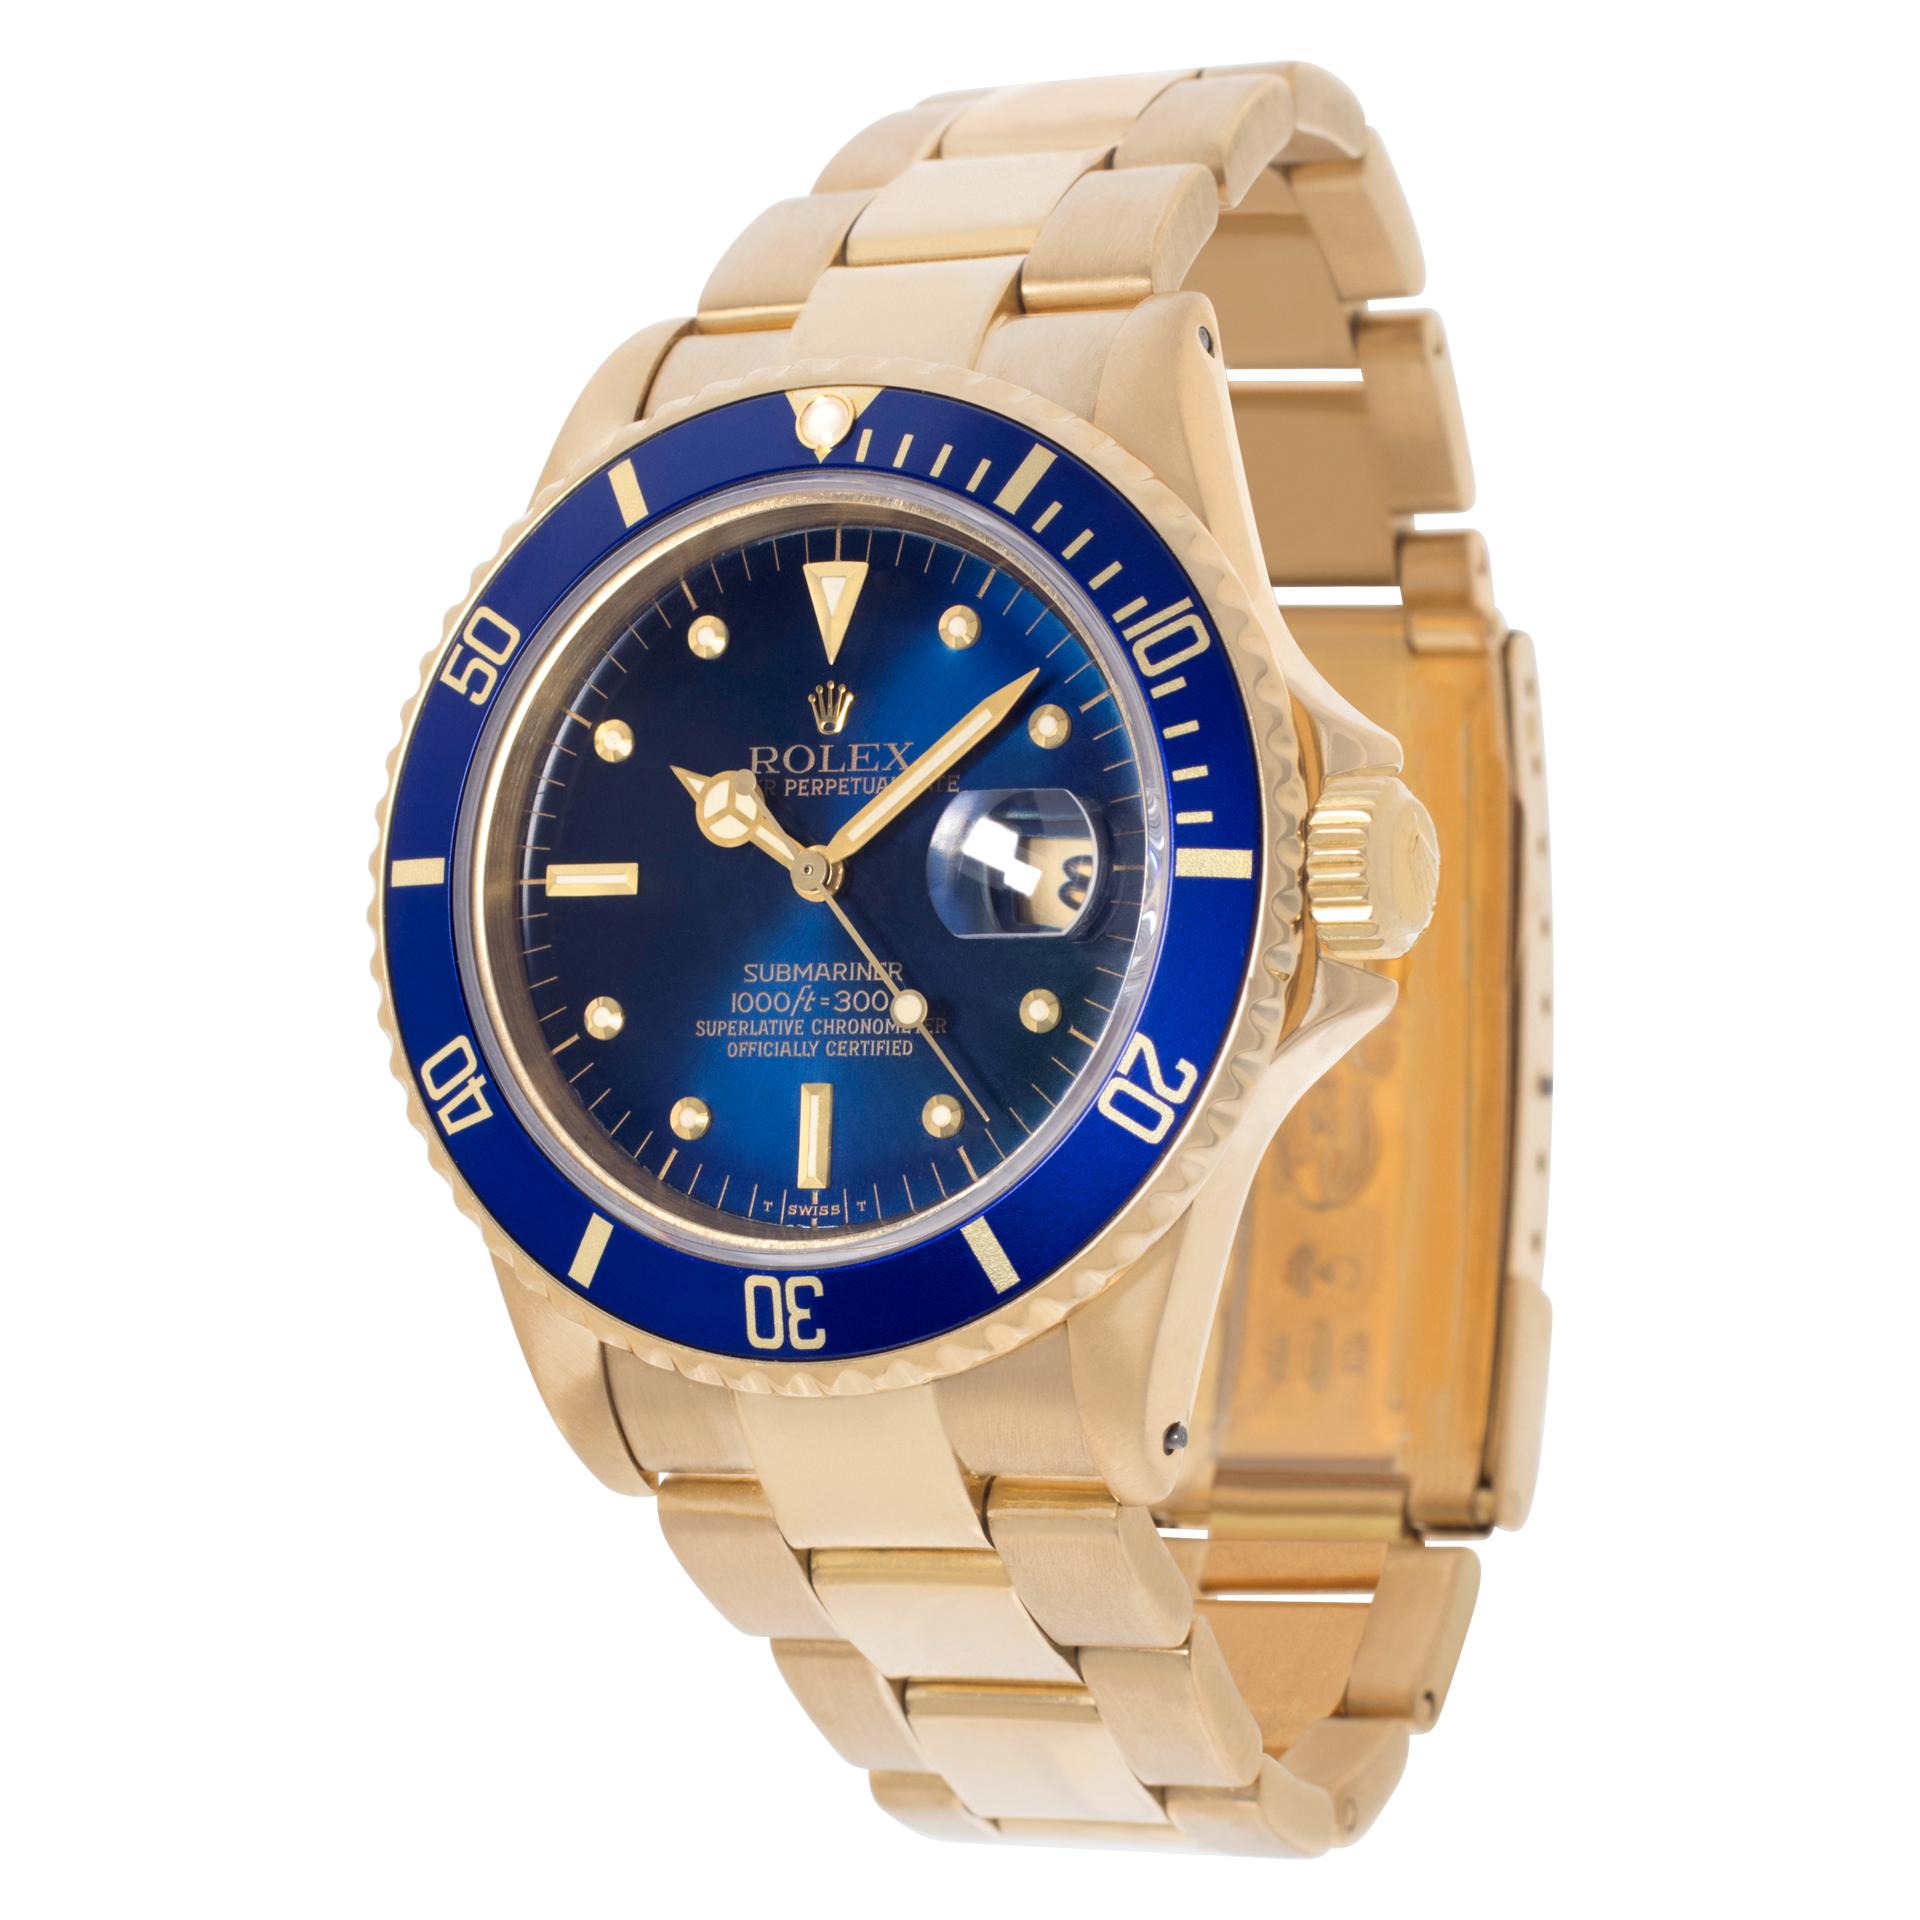 Rolex Submariner in 18k yellow gold. Auto w/ sweep seconds and date. 40 mm case size. Ref 16808. **Bank Wire Only At This Price** Circa 1982. Fine Pre-owned Rolex Watch.

 Certified preowned Dress Rolex Submariner 16808 watch is made out of yellow